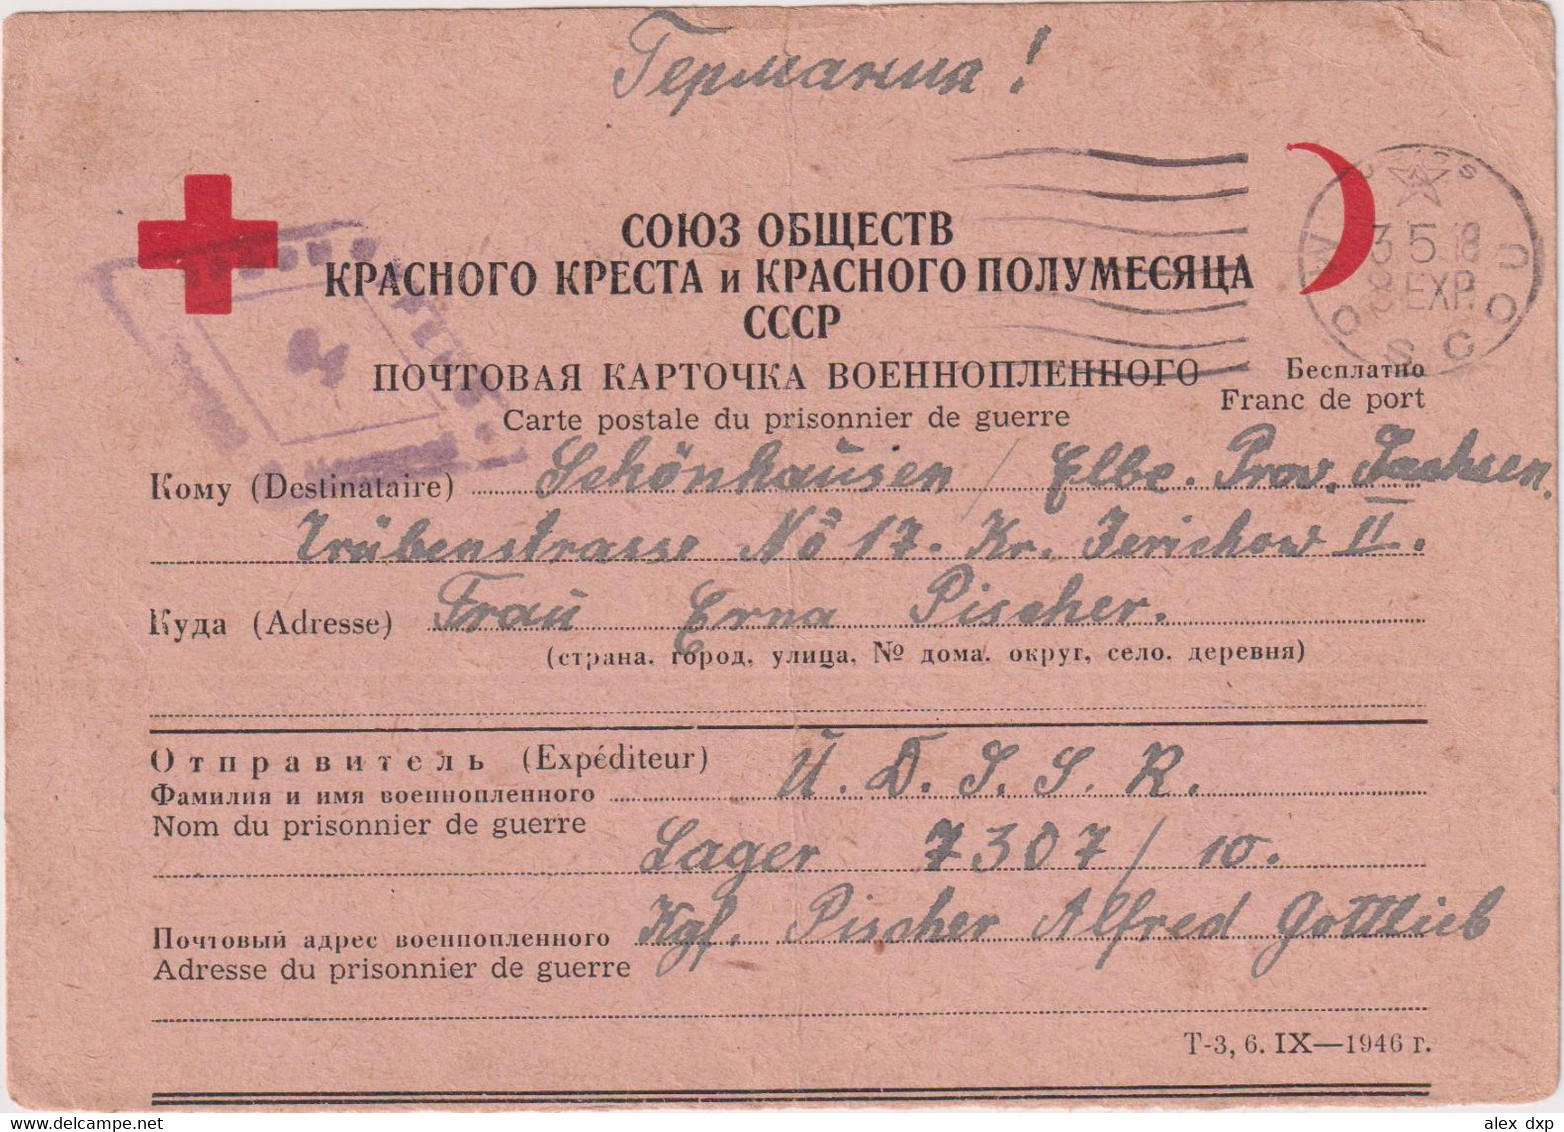 RUSSIA (USSR) > 1948 POSTAL HISTORY > POW RED CROSS CARD FROM POW CAMP 7307/10 TO SCHOHAUSEN, GERMANY - Covers & Documents